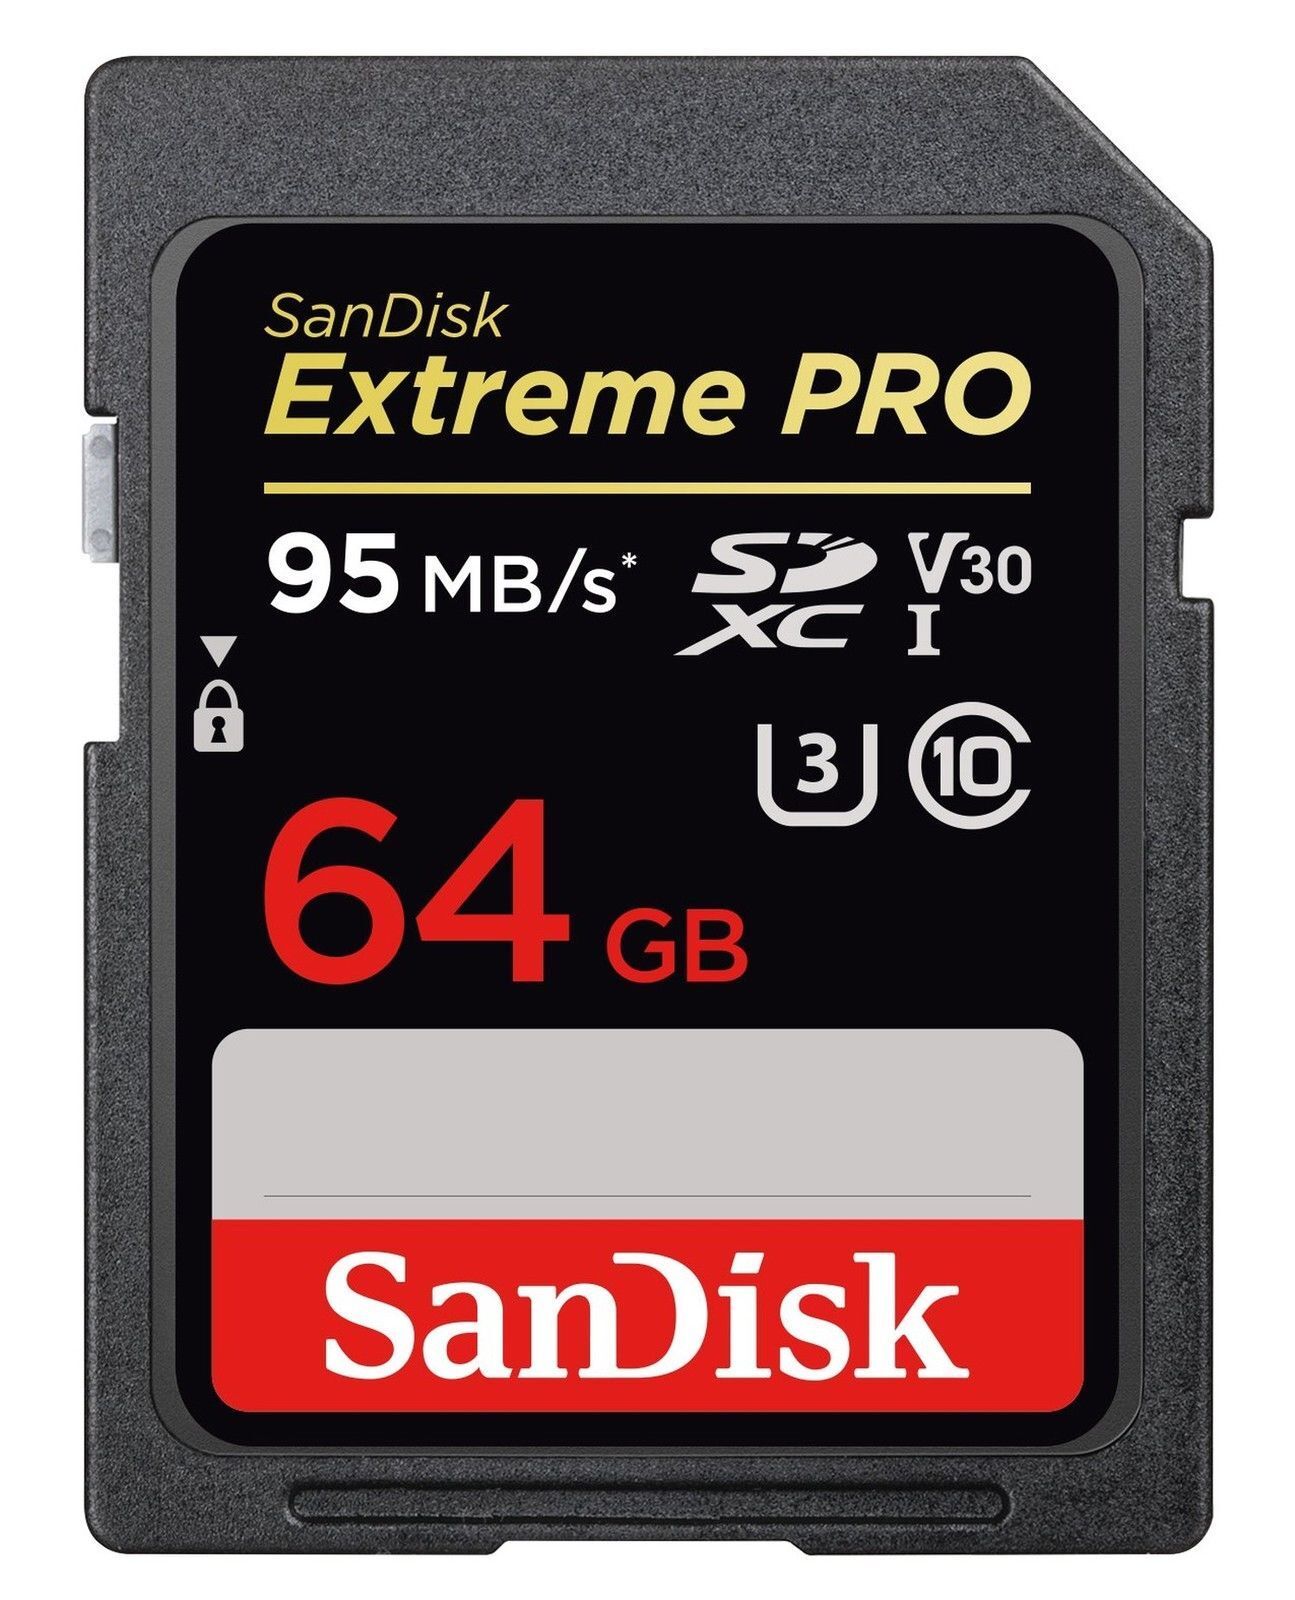 SanDisk Extreme Pro 633X 95MB/S Class 10 64GB SDXC SDHC SD UHS-I U3 Memory Card SanDisk SDSDXXG064GGN4IN